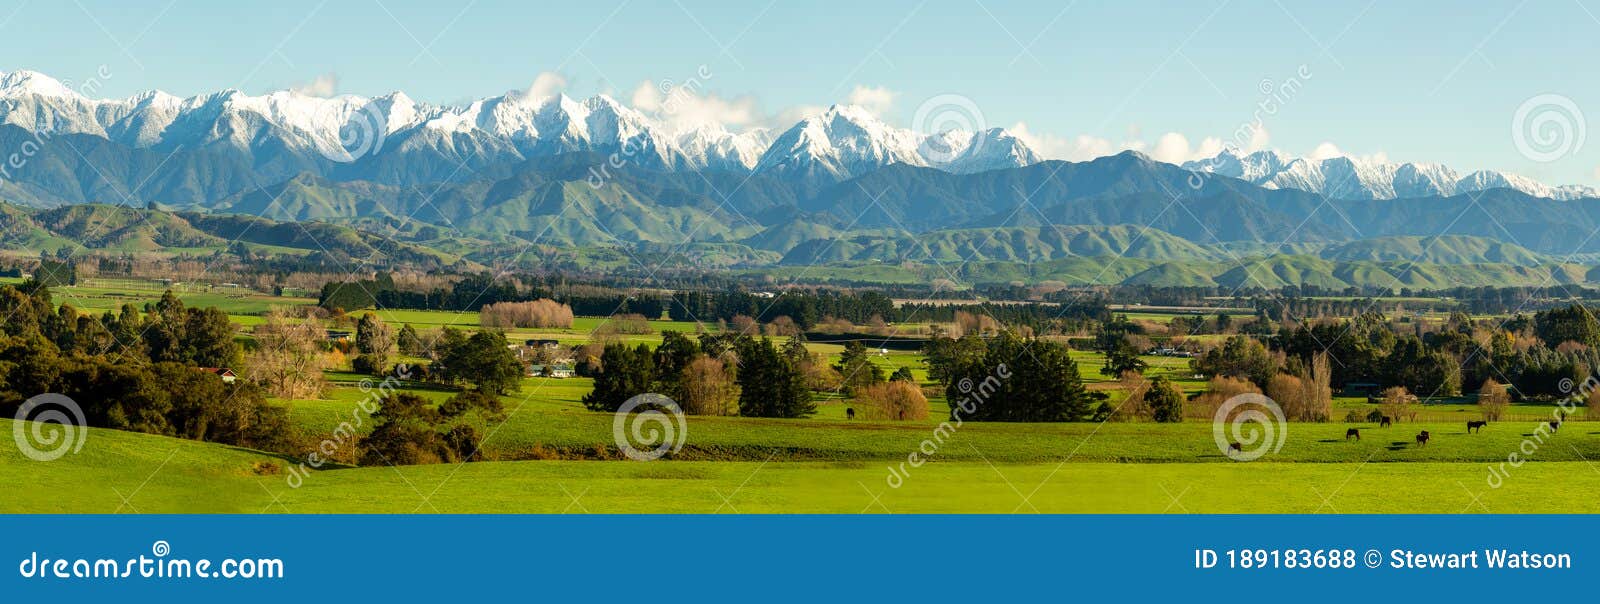 the gtararua ranges in the wairarapa with snow on the peaks and the lush rural agricultural valley below